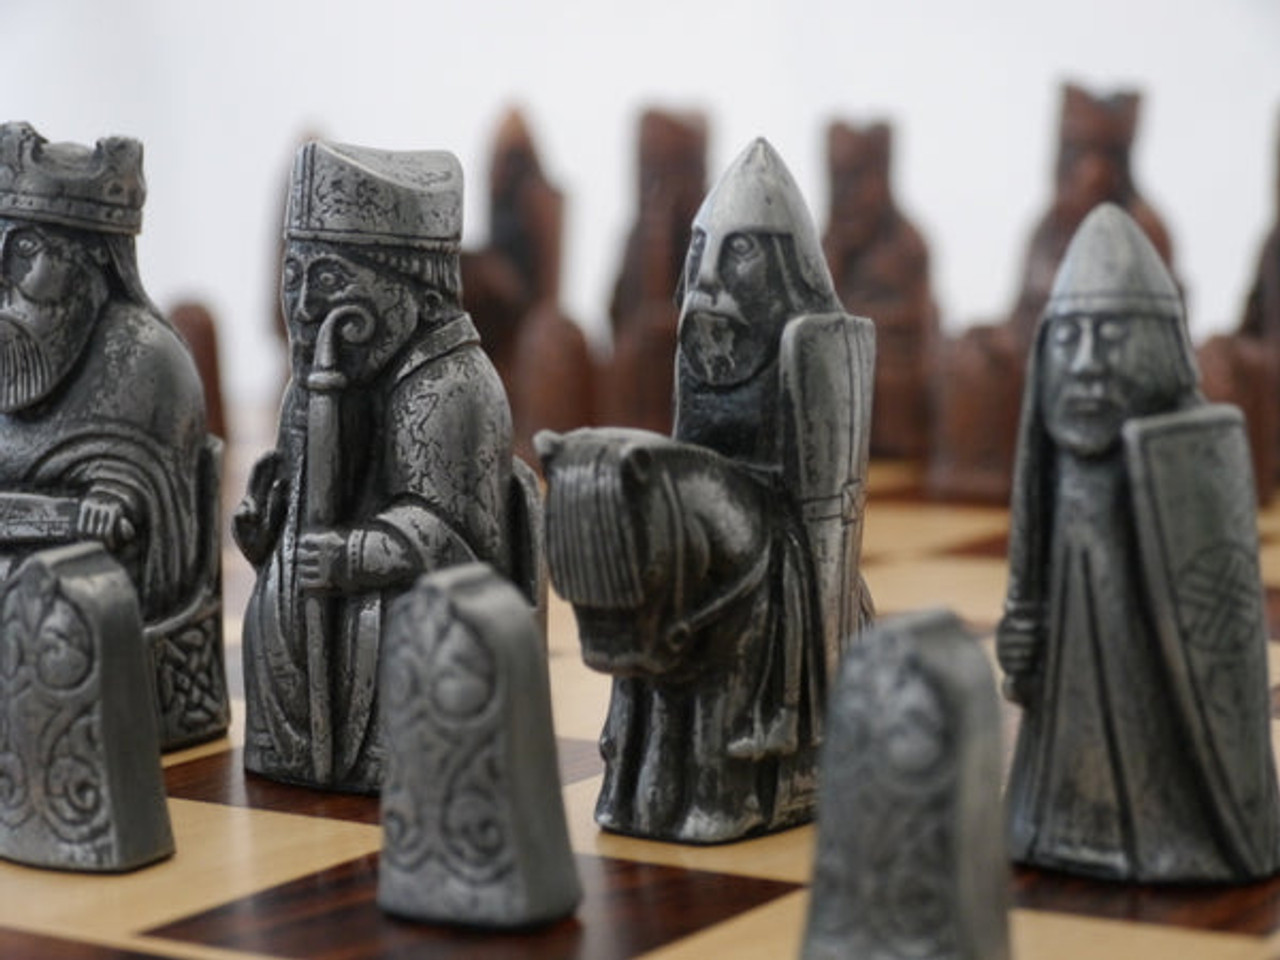 The Metal Isle of Lewis Chess Pieces - Antique Silver & Copper Finish with 3.5" King black pieces up close 